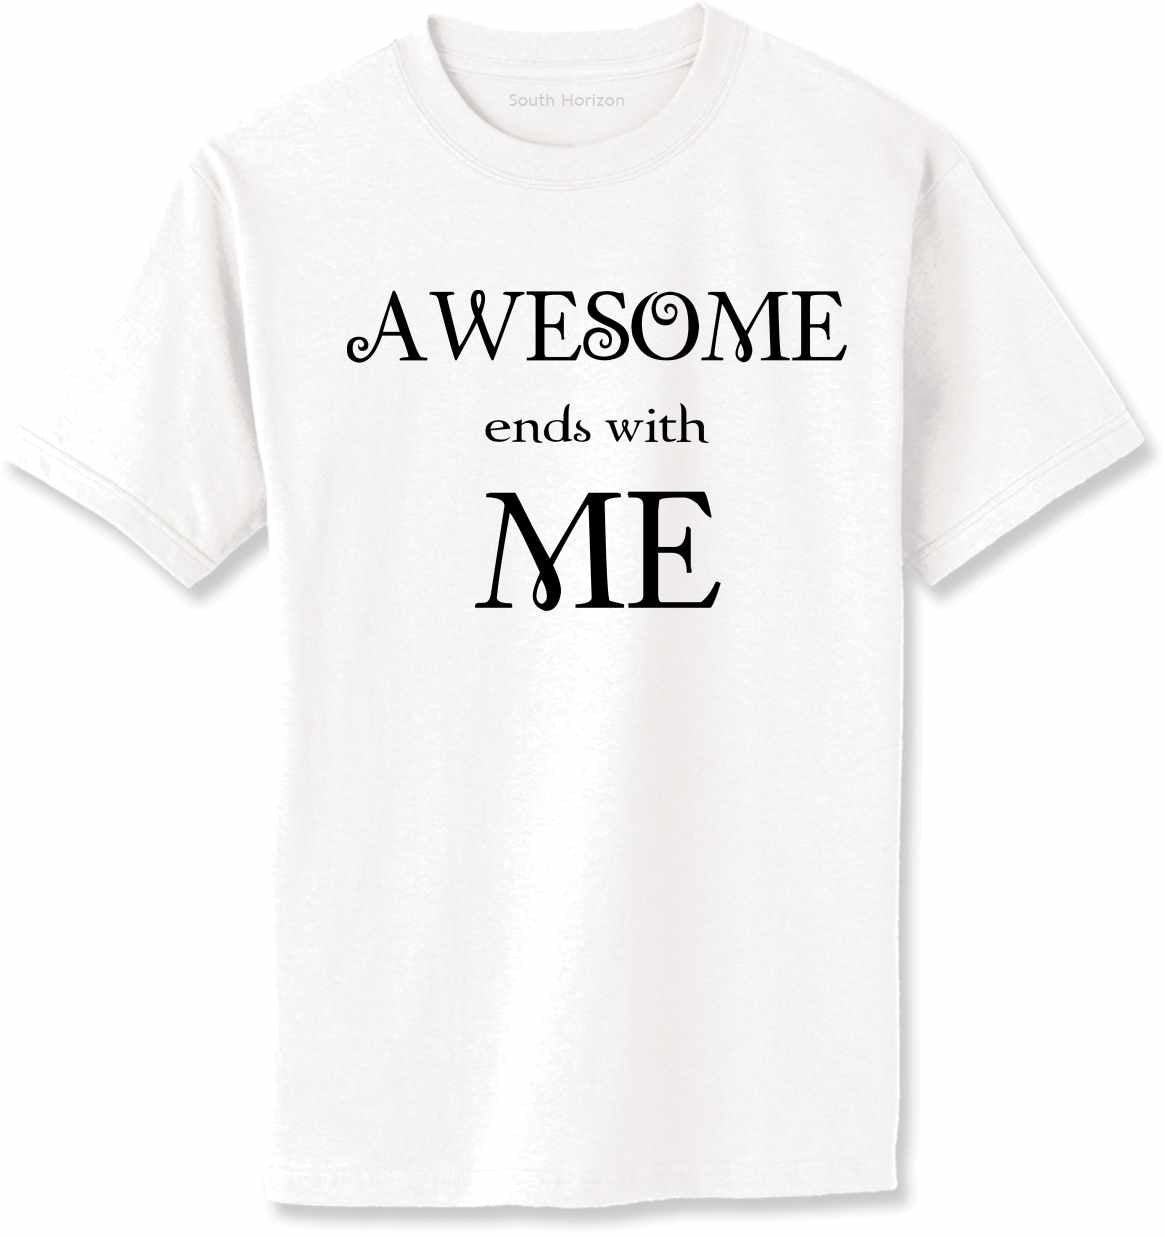 Awesome Ends with Me Adult T-Shirt (#817-1)